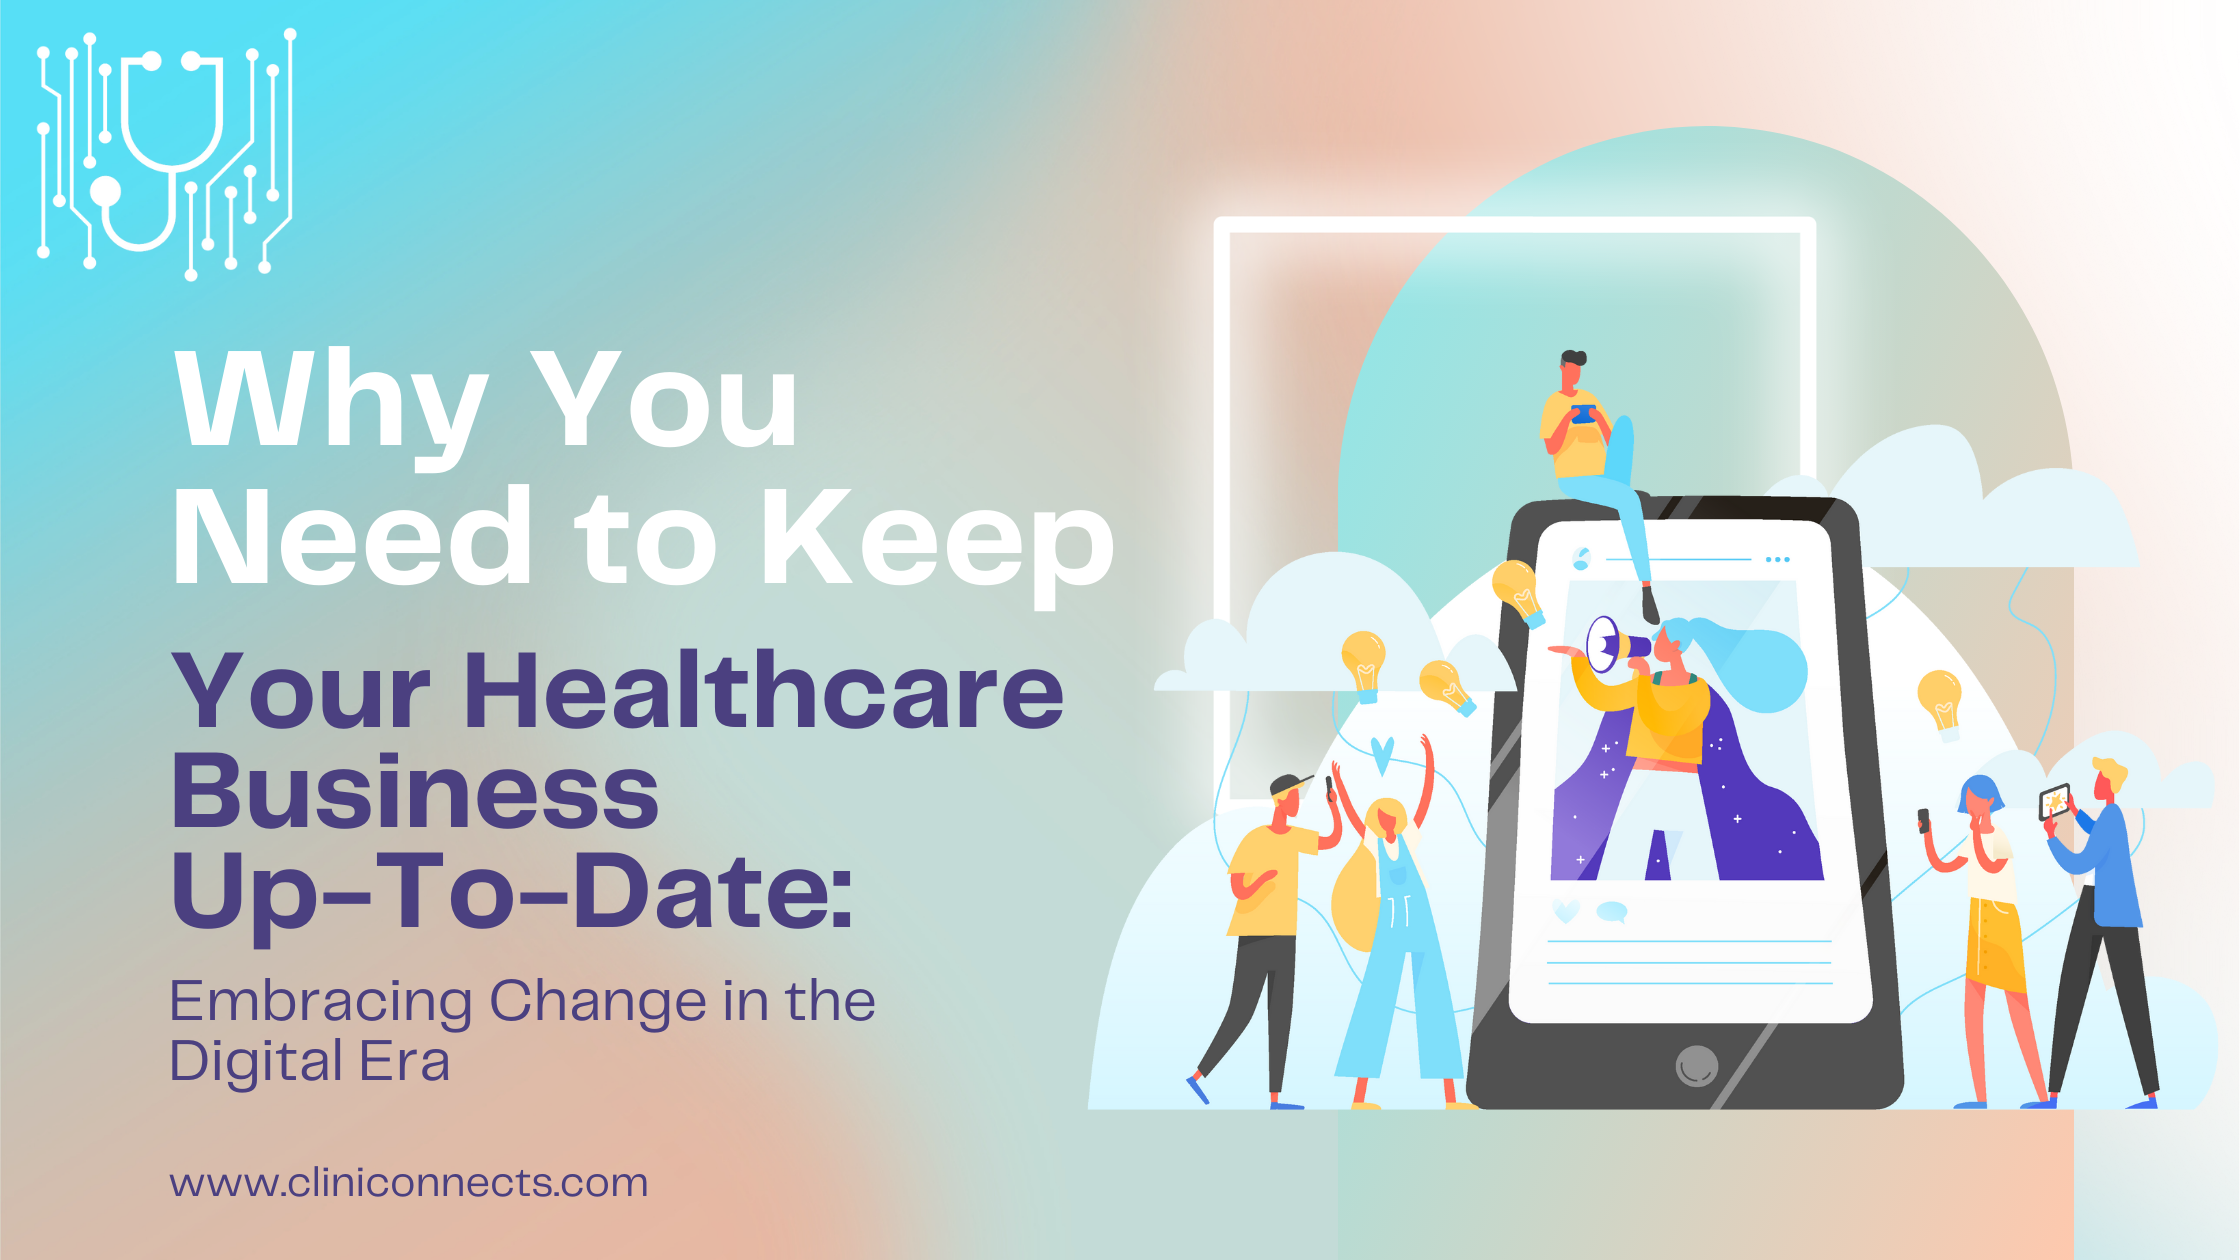 Why You Need to Keep Your Healthcare Business Up-To-Date: Embracing Change in the Digital Era